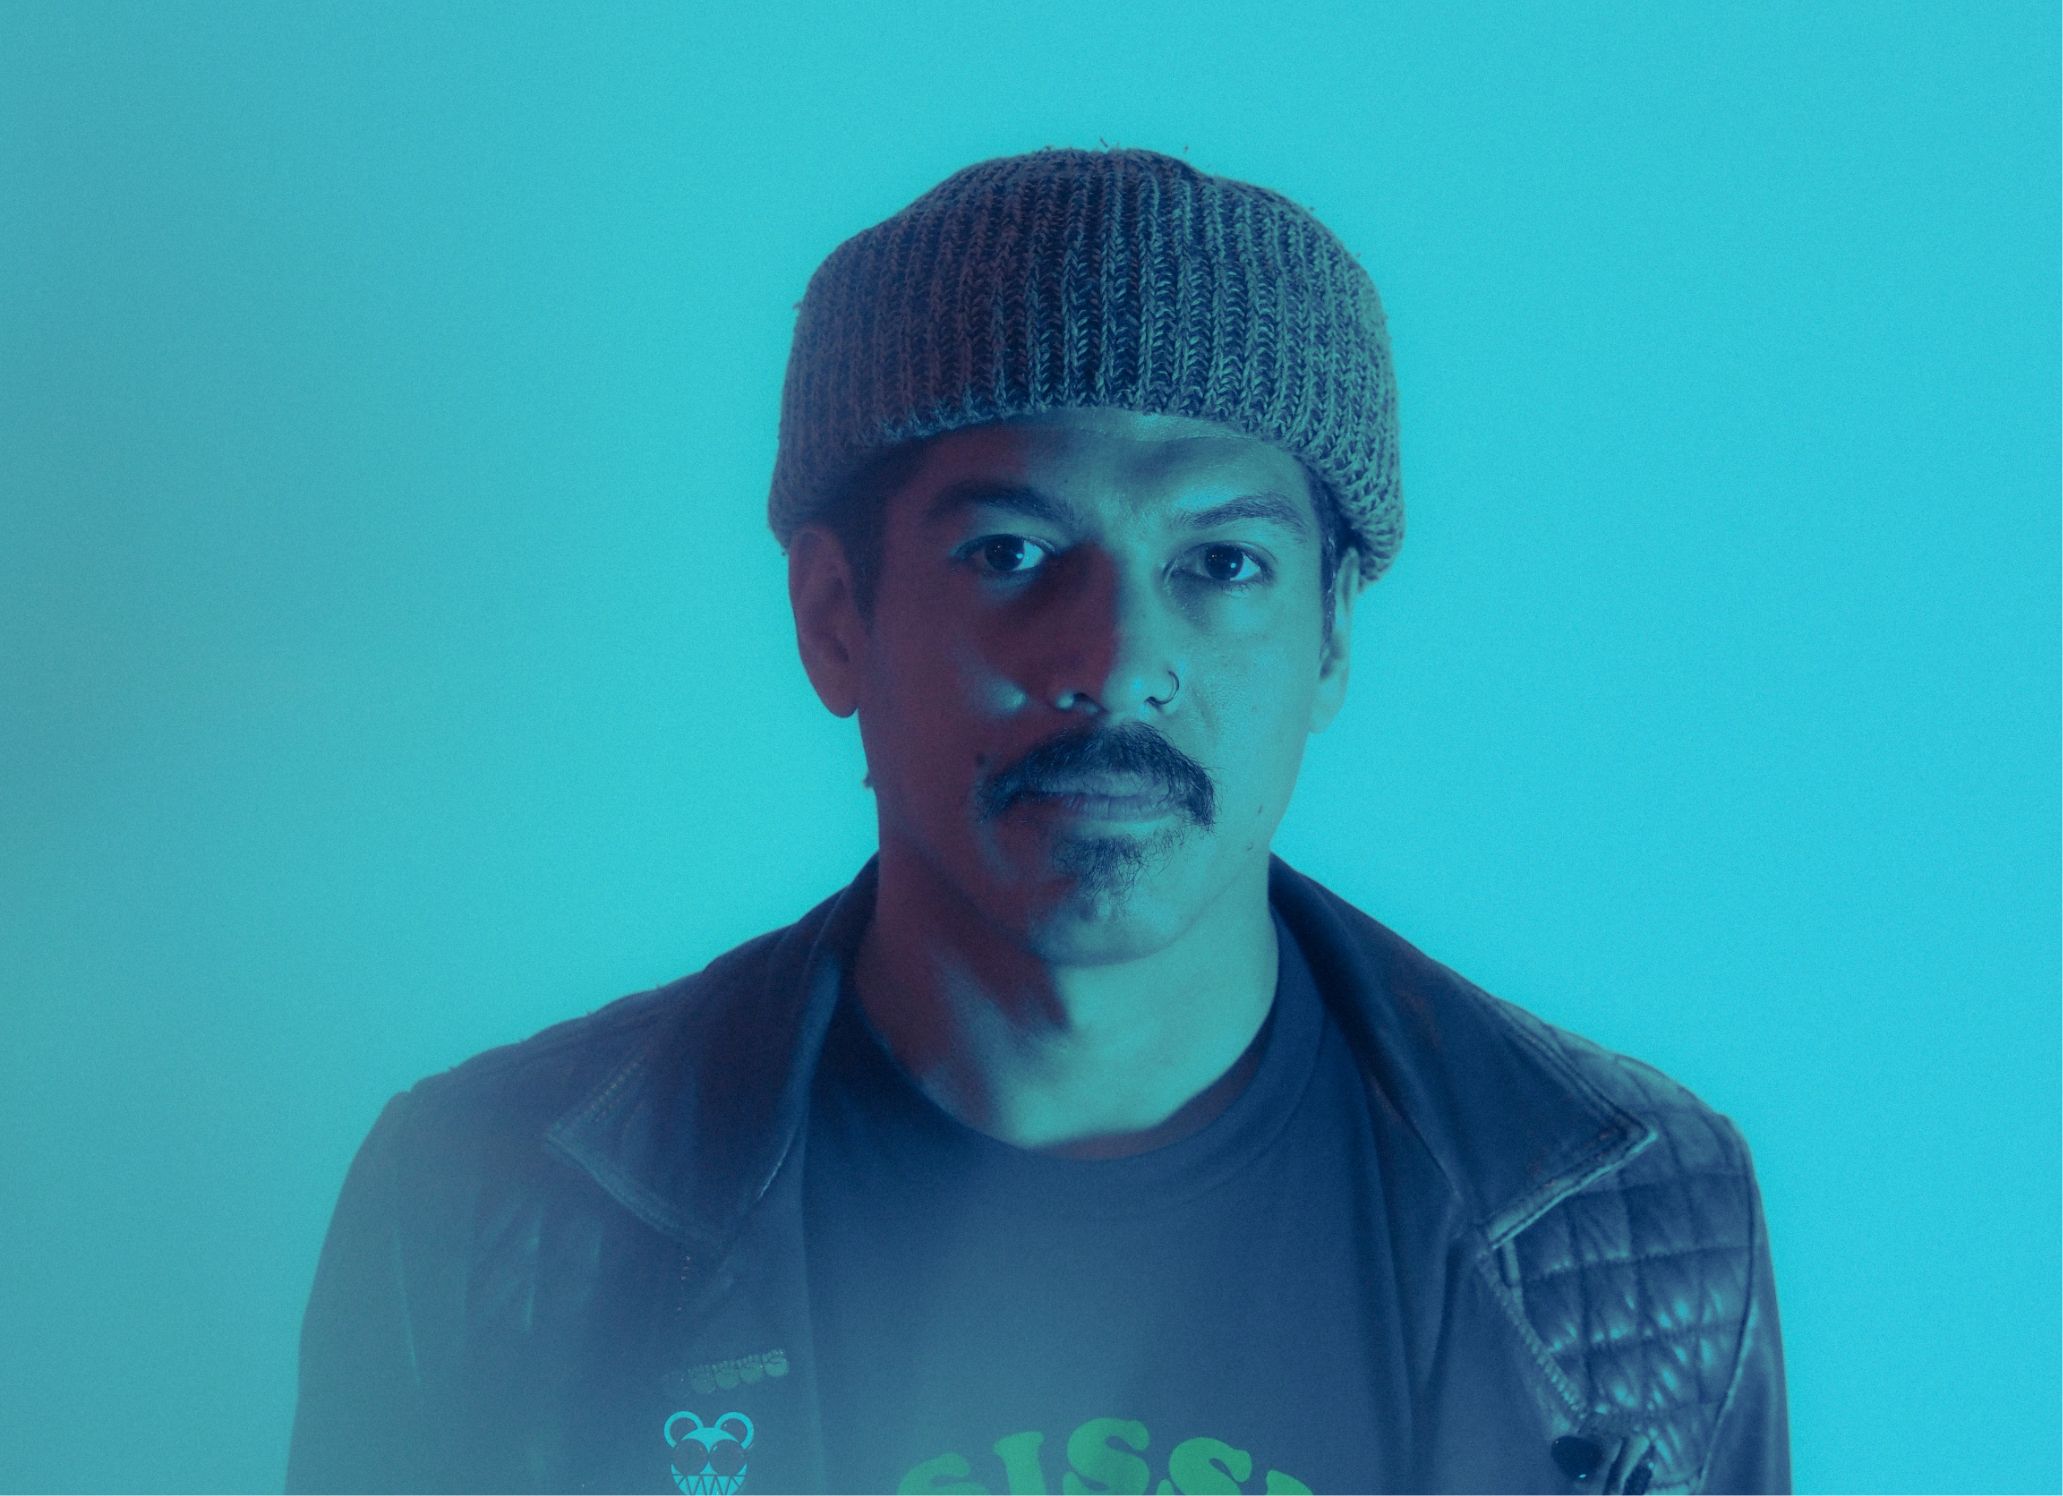 A man with a mustache wearing a beanie and leather jacket against a blue background.